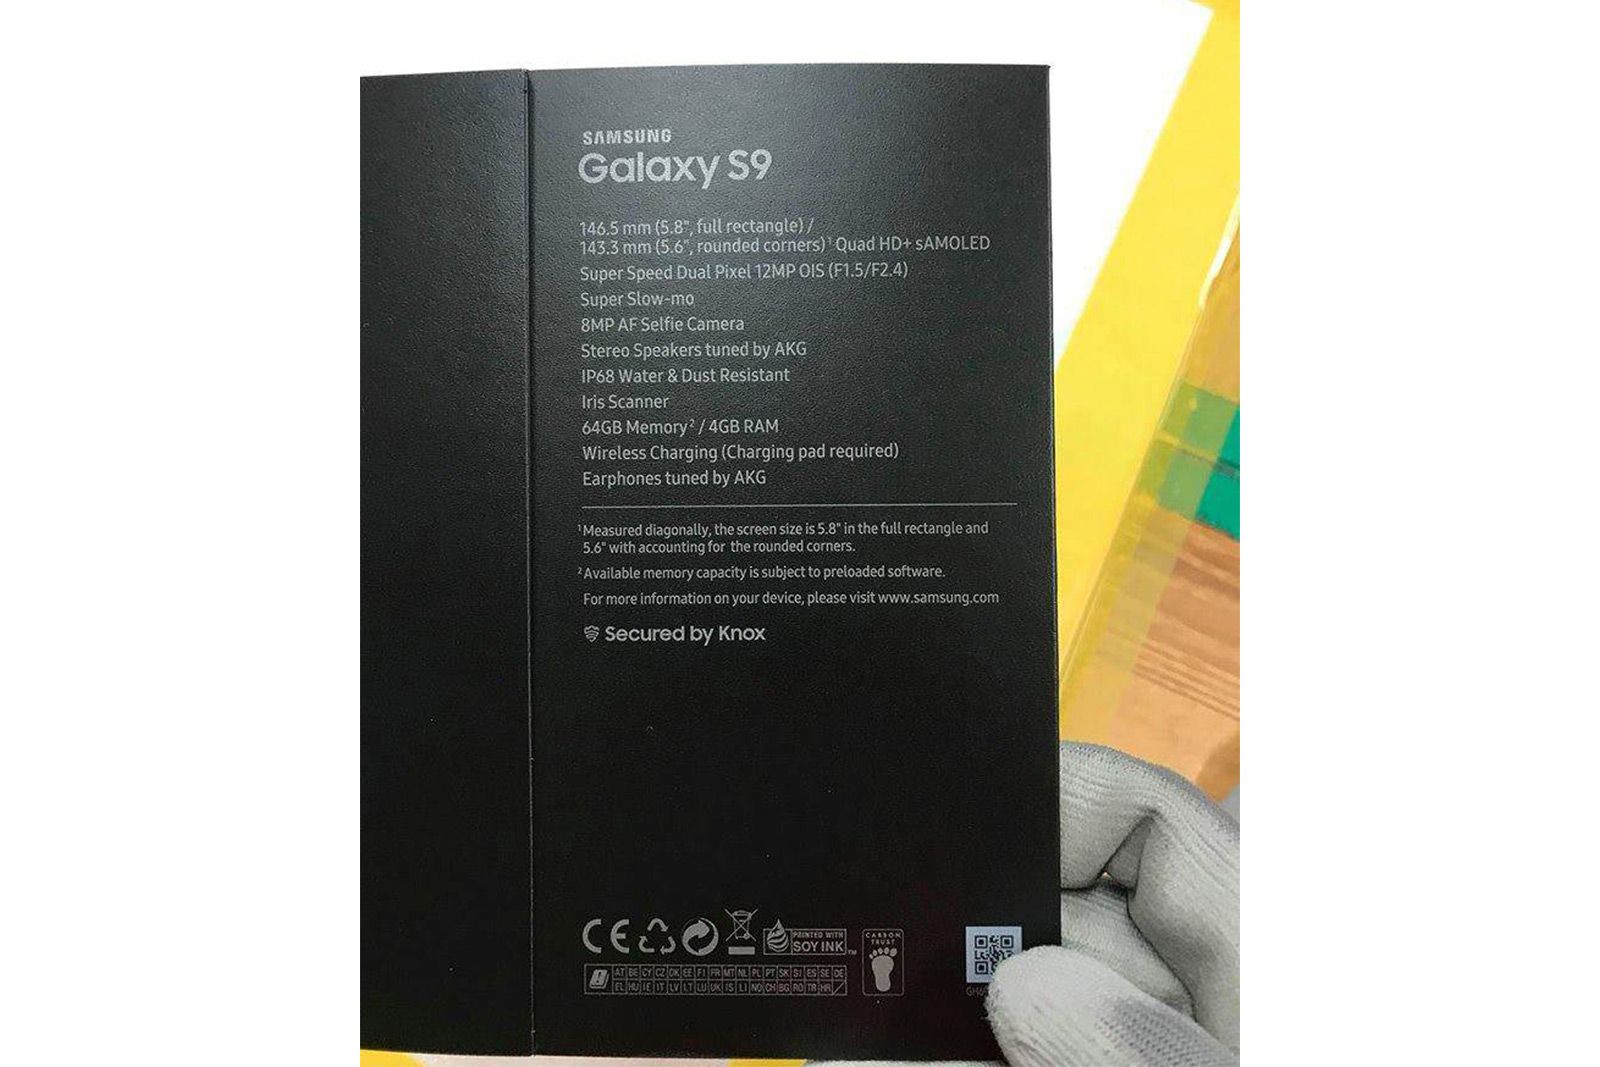 Samsung Galaxy S9 box reveals specs of the upcoming flagship image 2